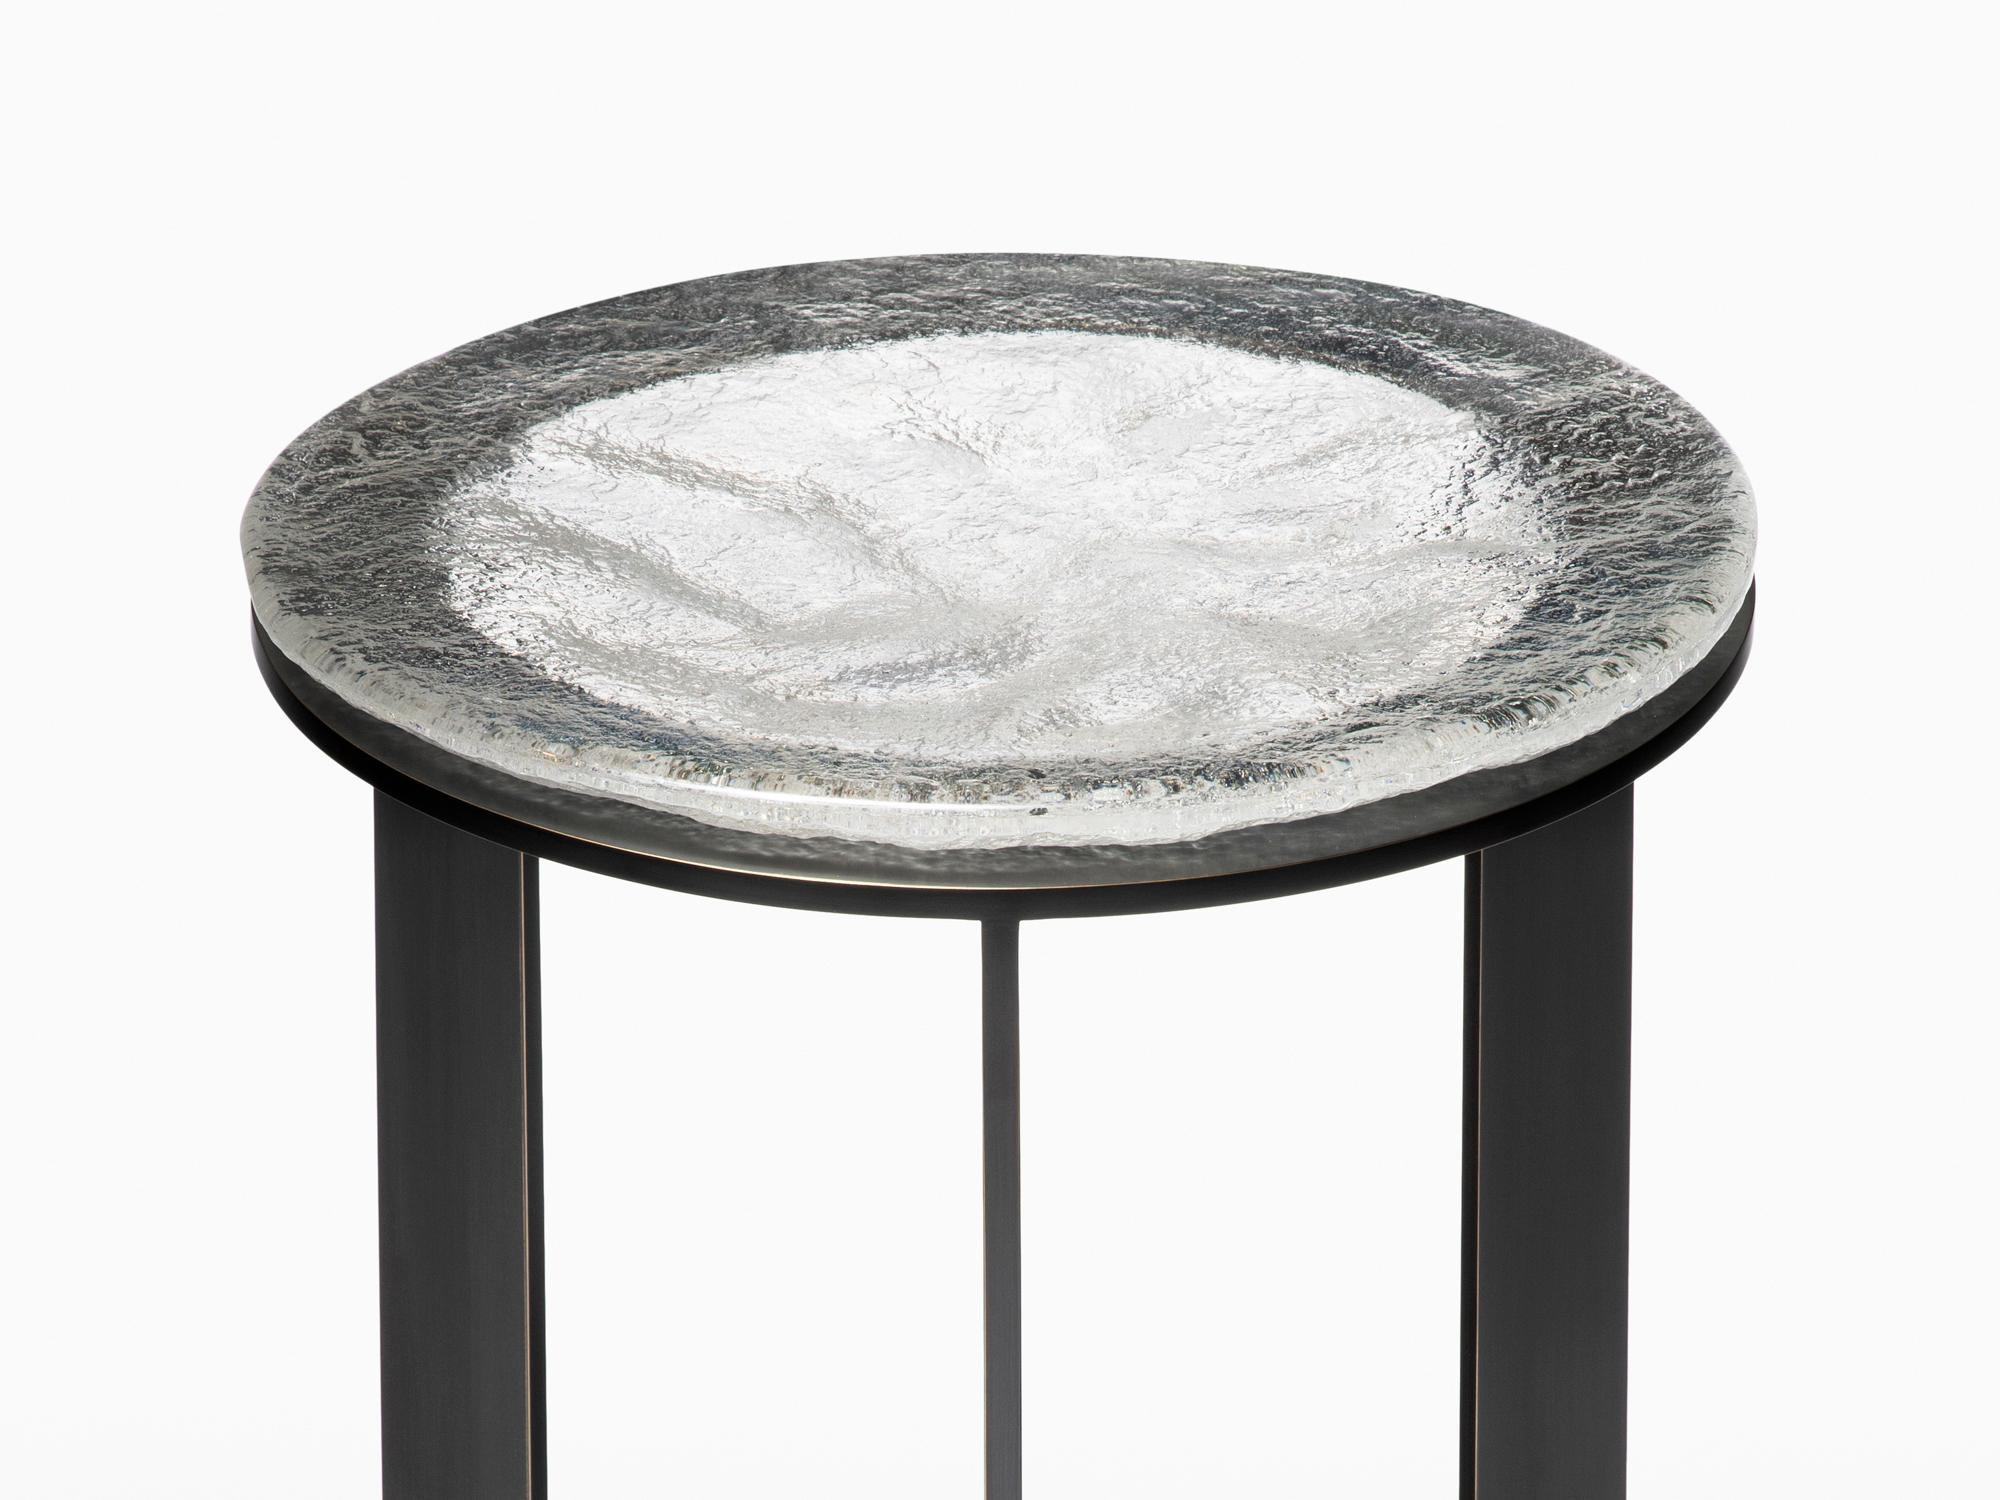 Artisan sand cast glass and expert metalwork highlight the Kepler Side Table. The cast glass top is produced using a ladle-poured casting process where molten glass is poured into a sand mold by expert glass artisans. The result is cast glass with a